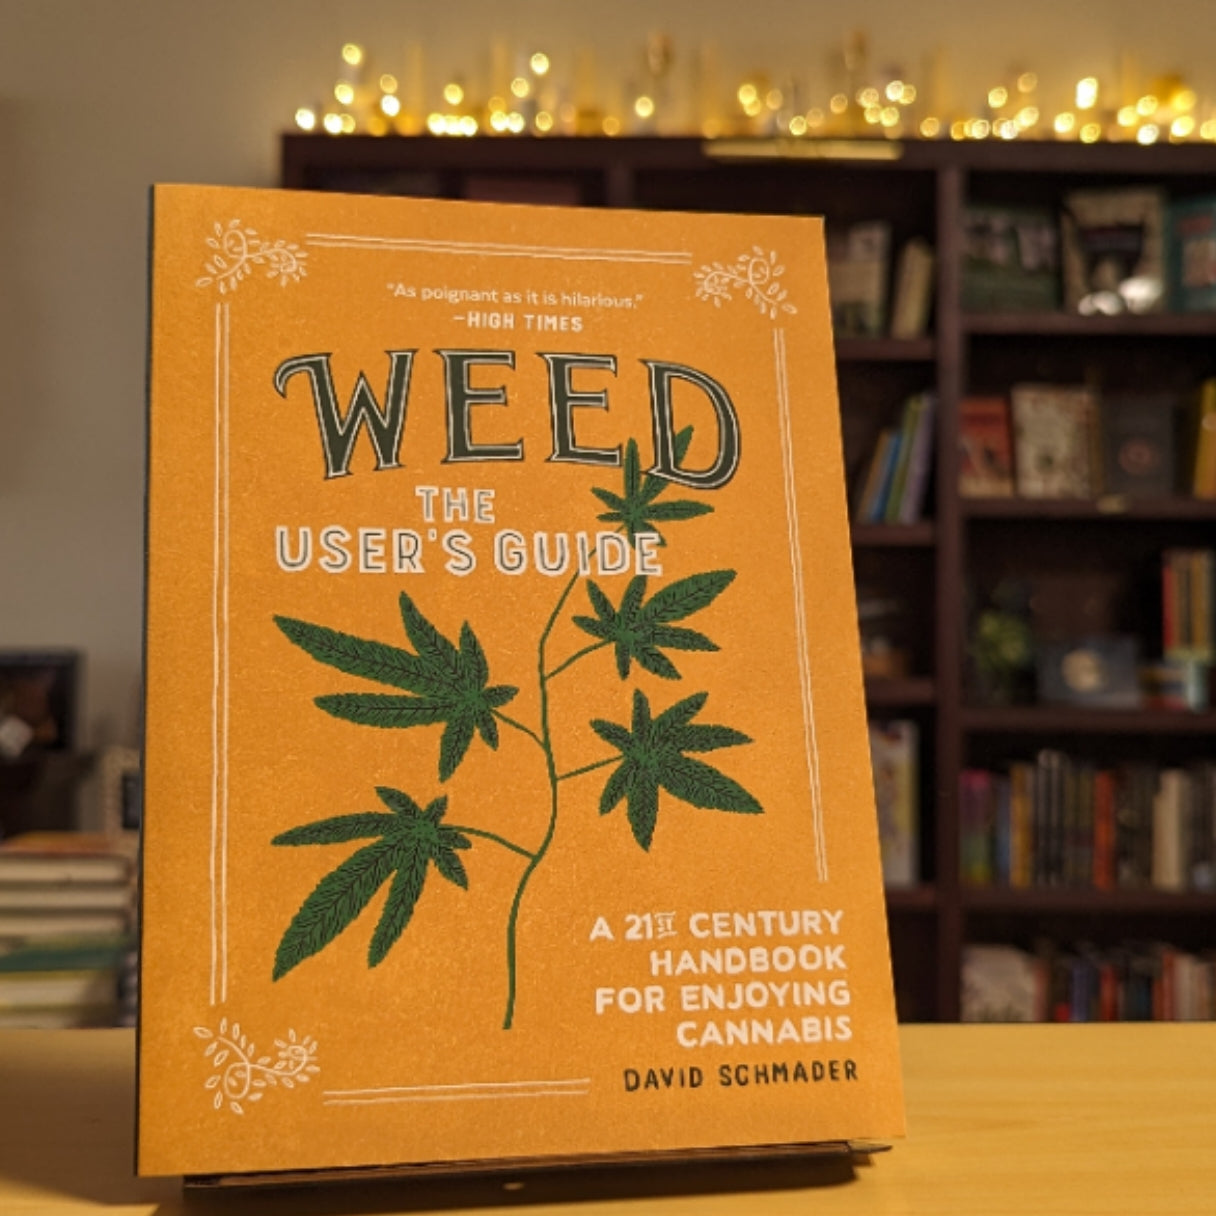 Weed: The User's Guide: A 21st Century Handbook for Enjoying Cannabis